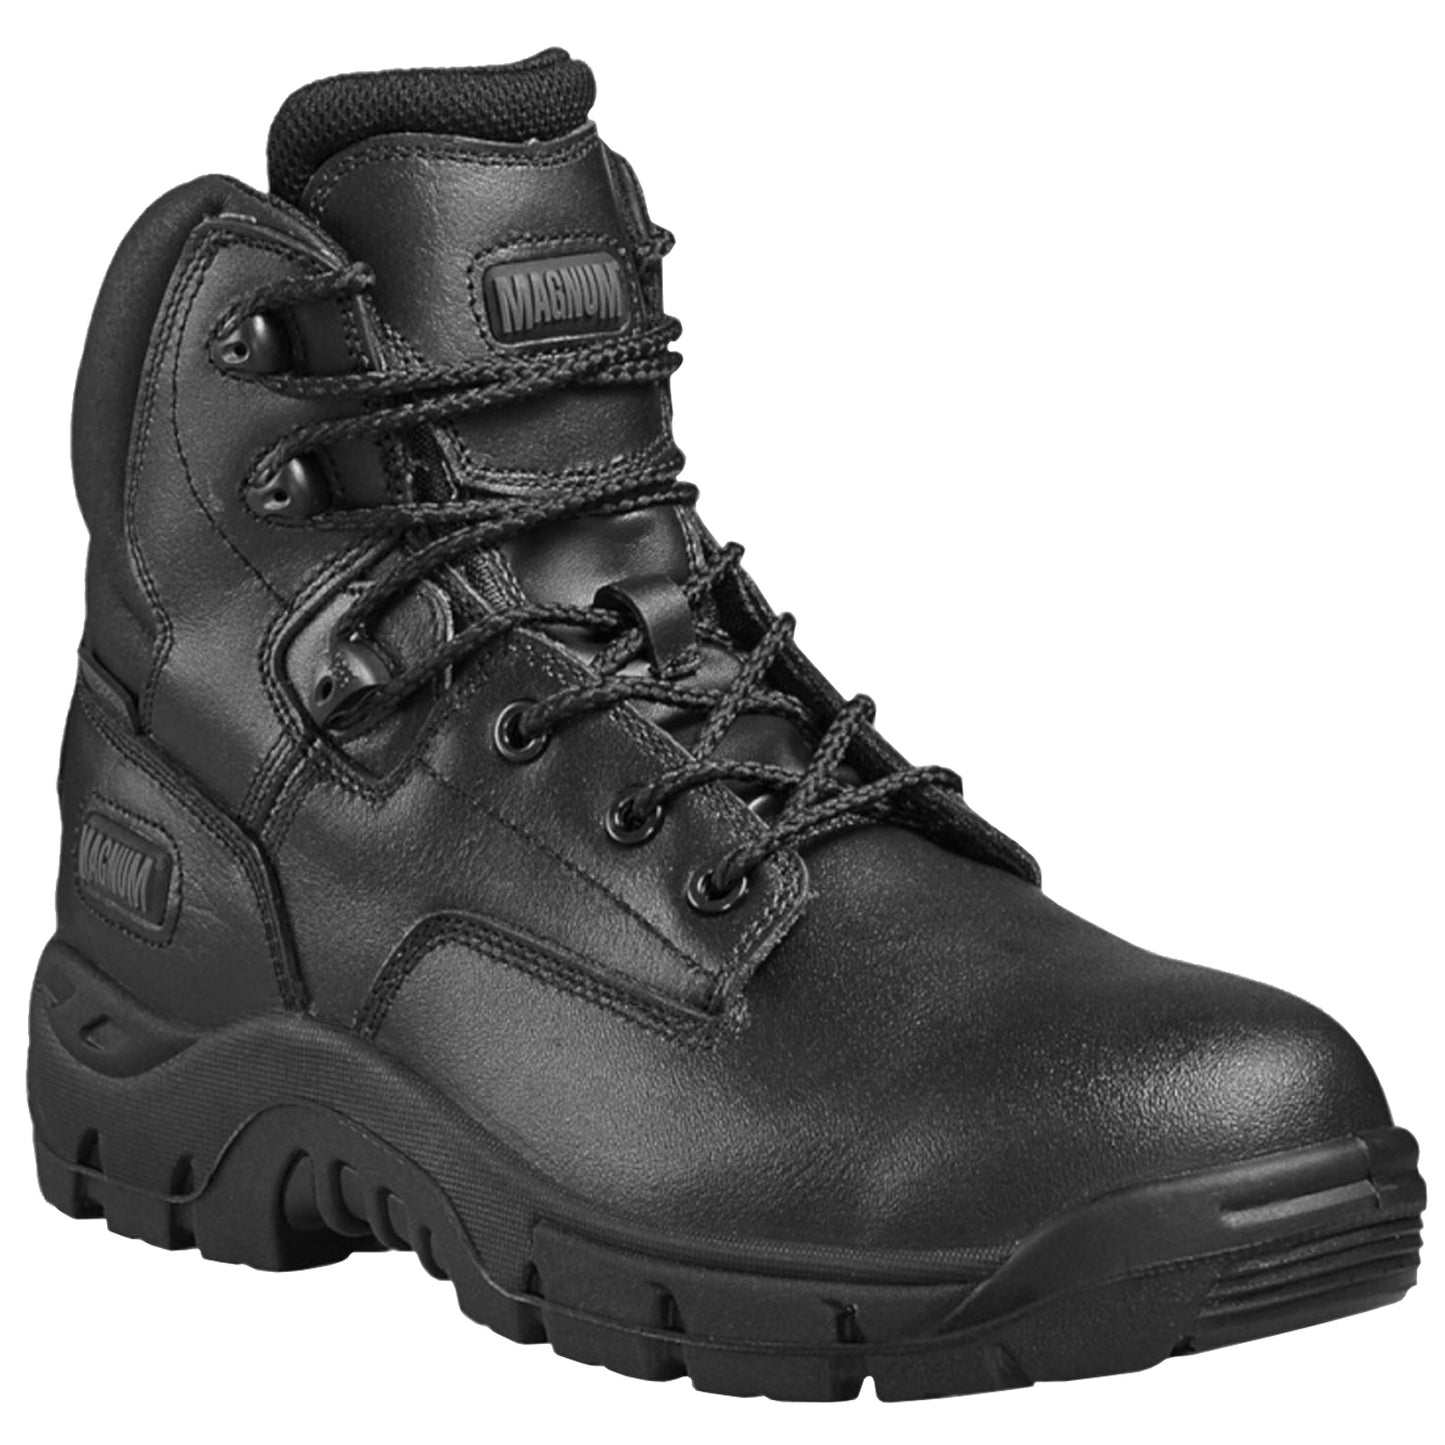 Magnum Mens Precision Sitemaster Composite Toe S3 Safety Boots